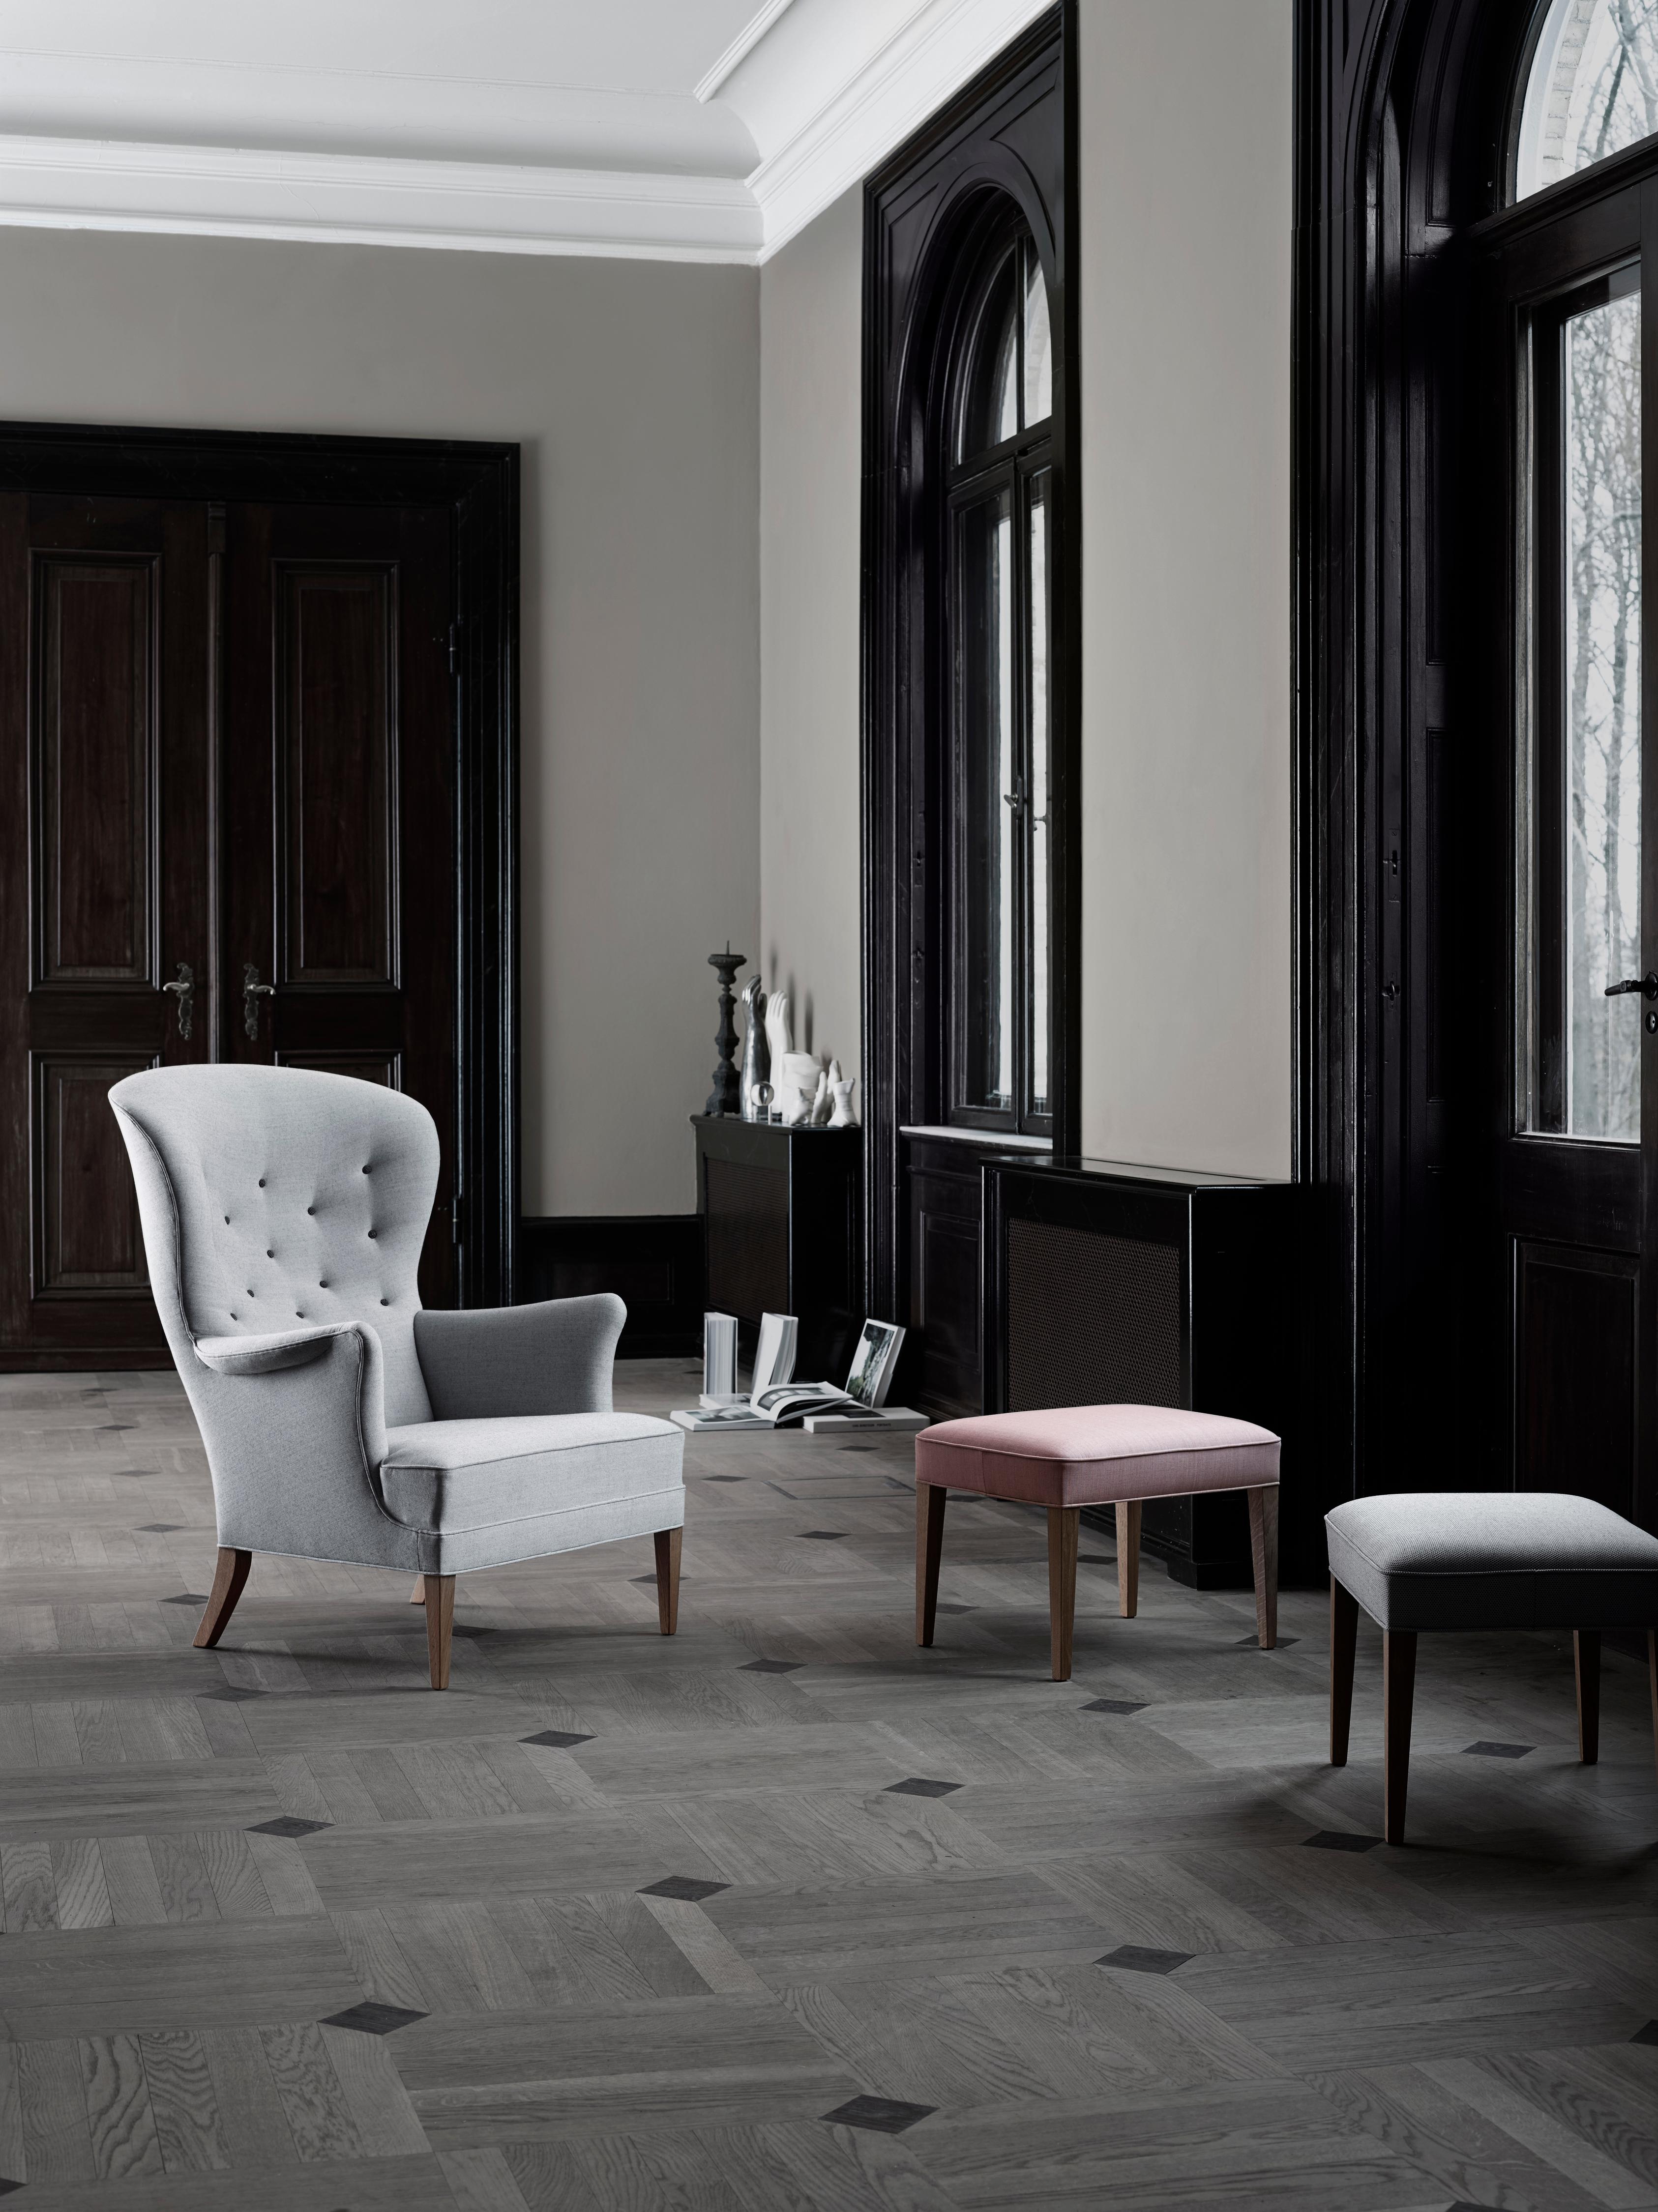 The FH420 heritage footstool by Frits Henningsen has a robust and classic air of tranquility about it. With solid wooden legs and upholstered detailing, it was designed to match the Heritage chair, but it also works equally well on its